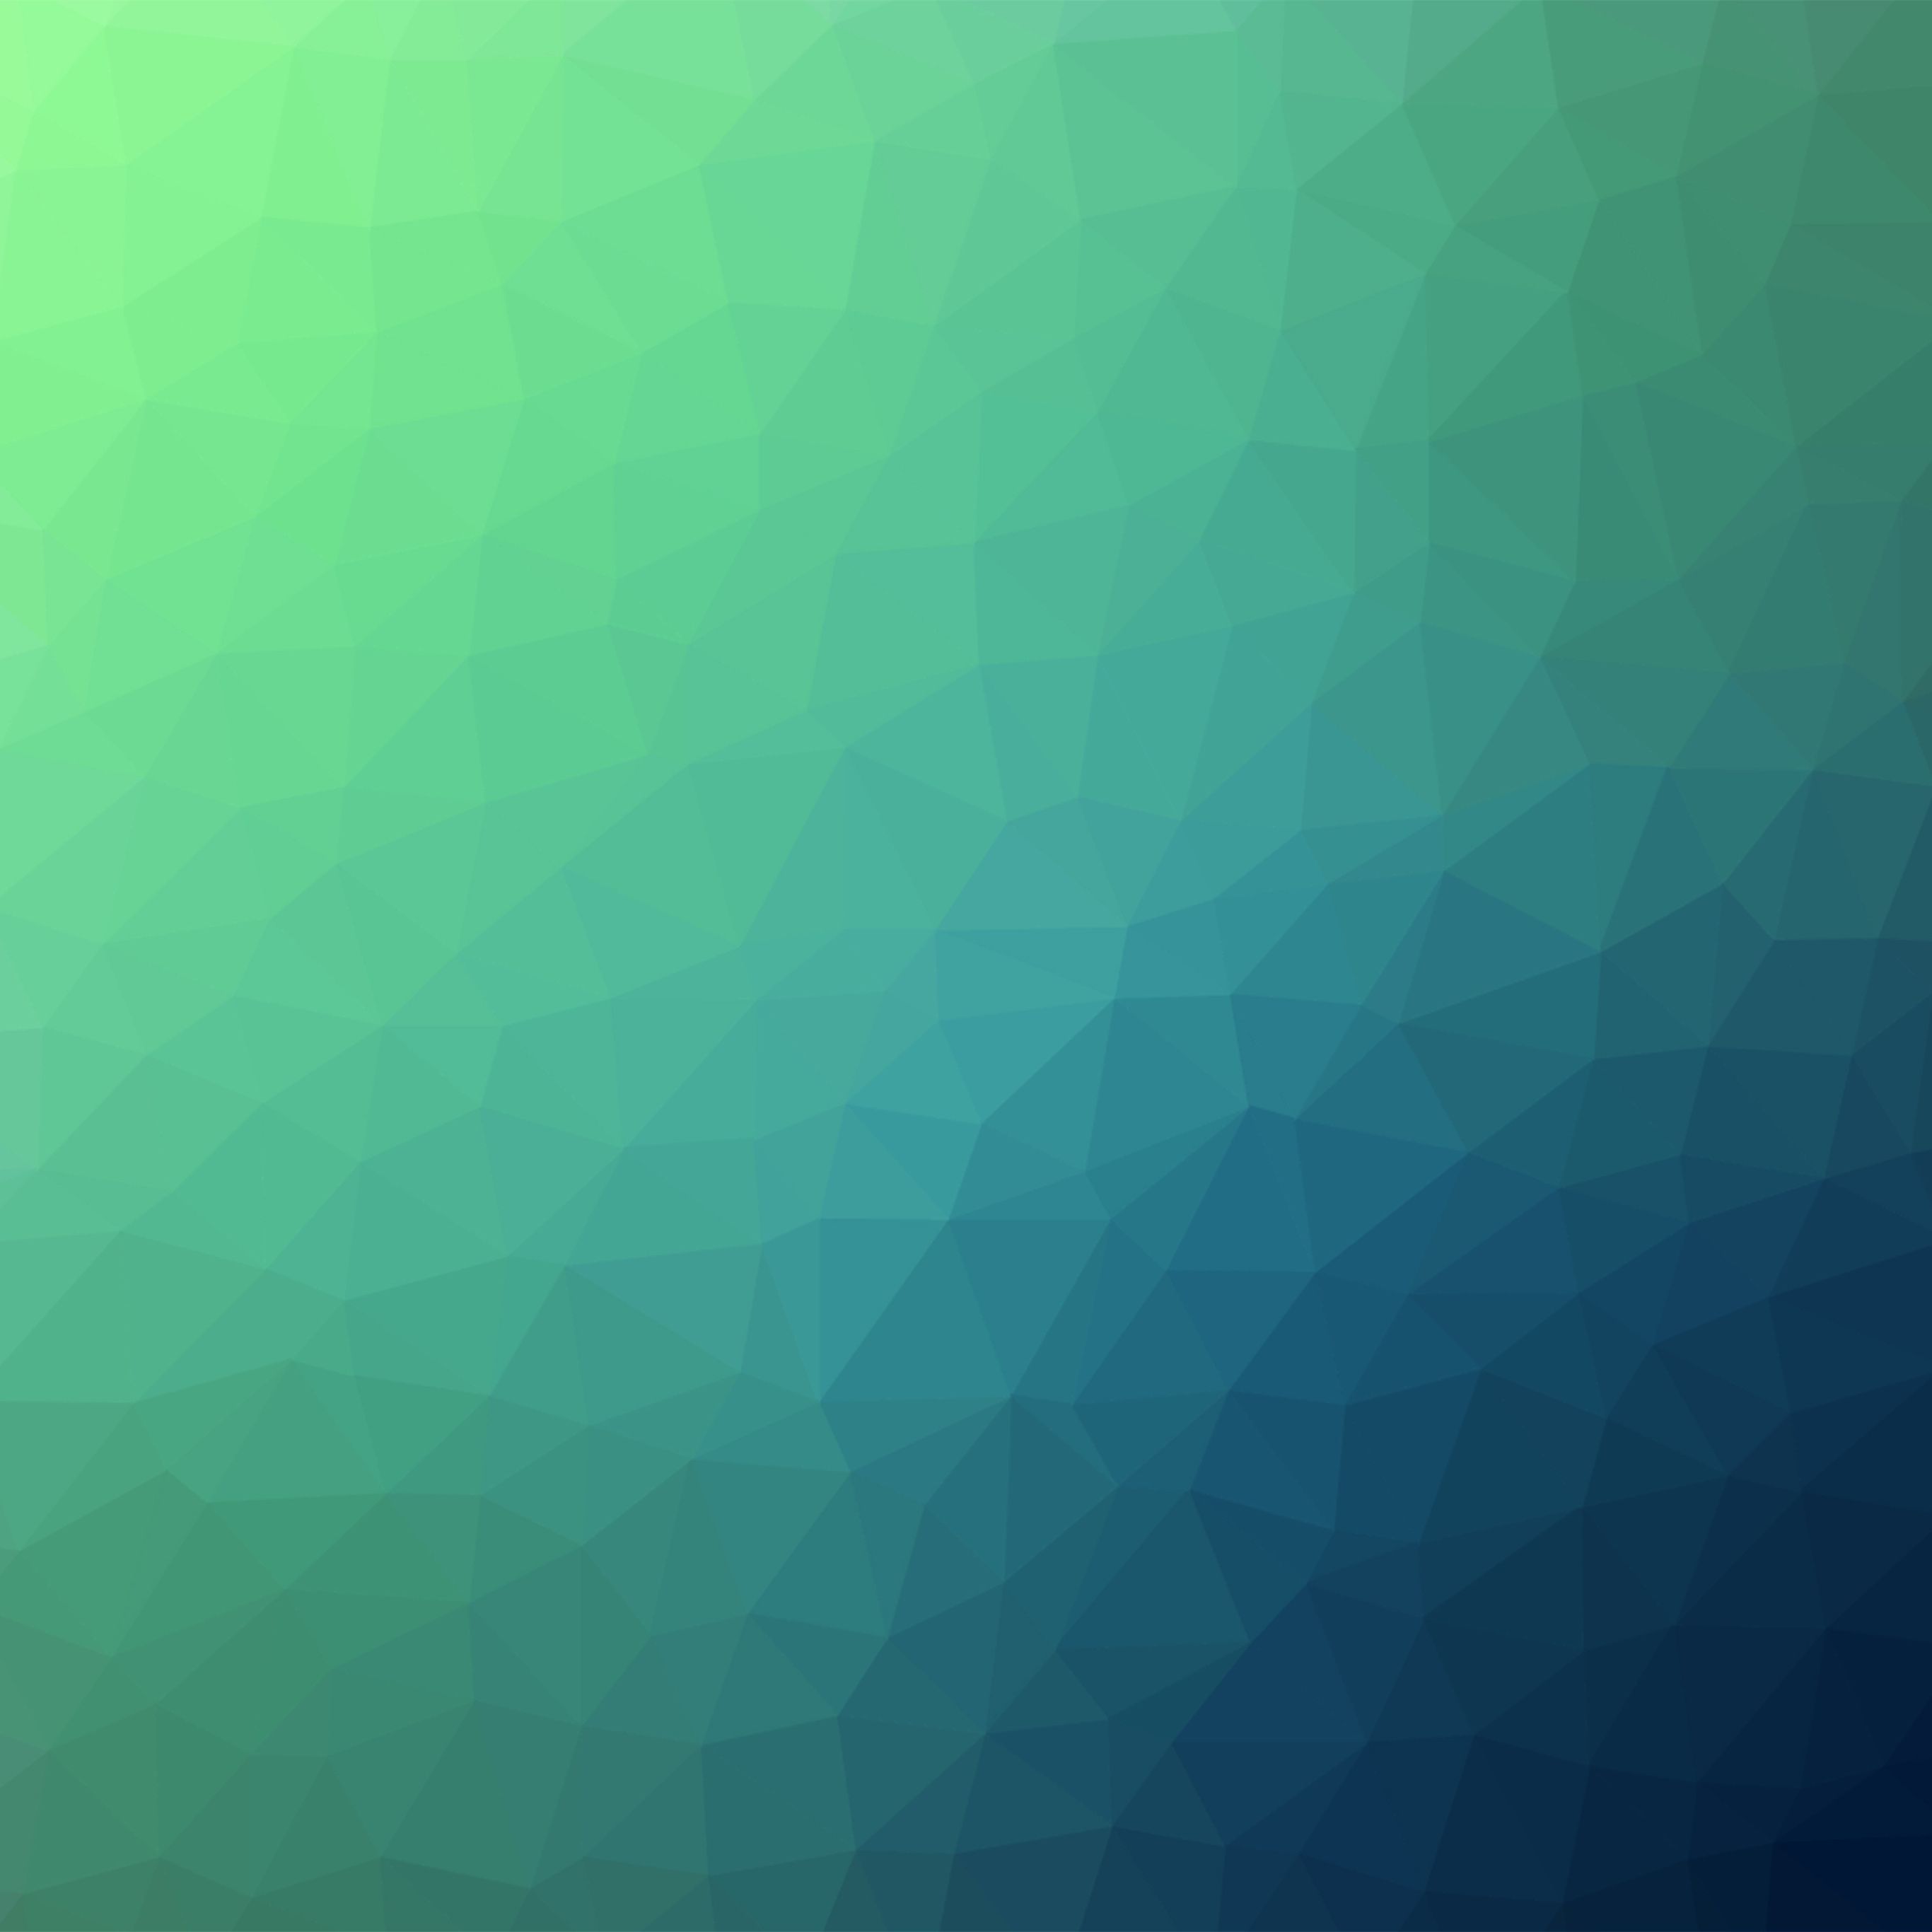 Blue And Green Wallpapers 4k Hd Blue And Green Backgrounds On Wallpaperbat